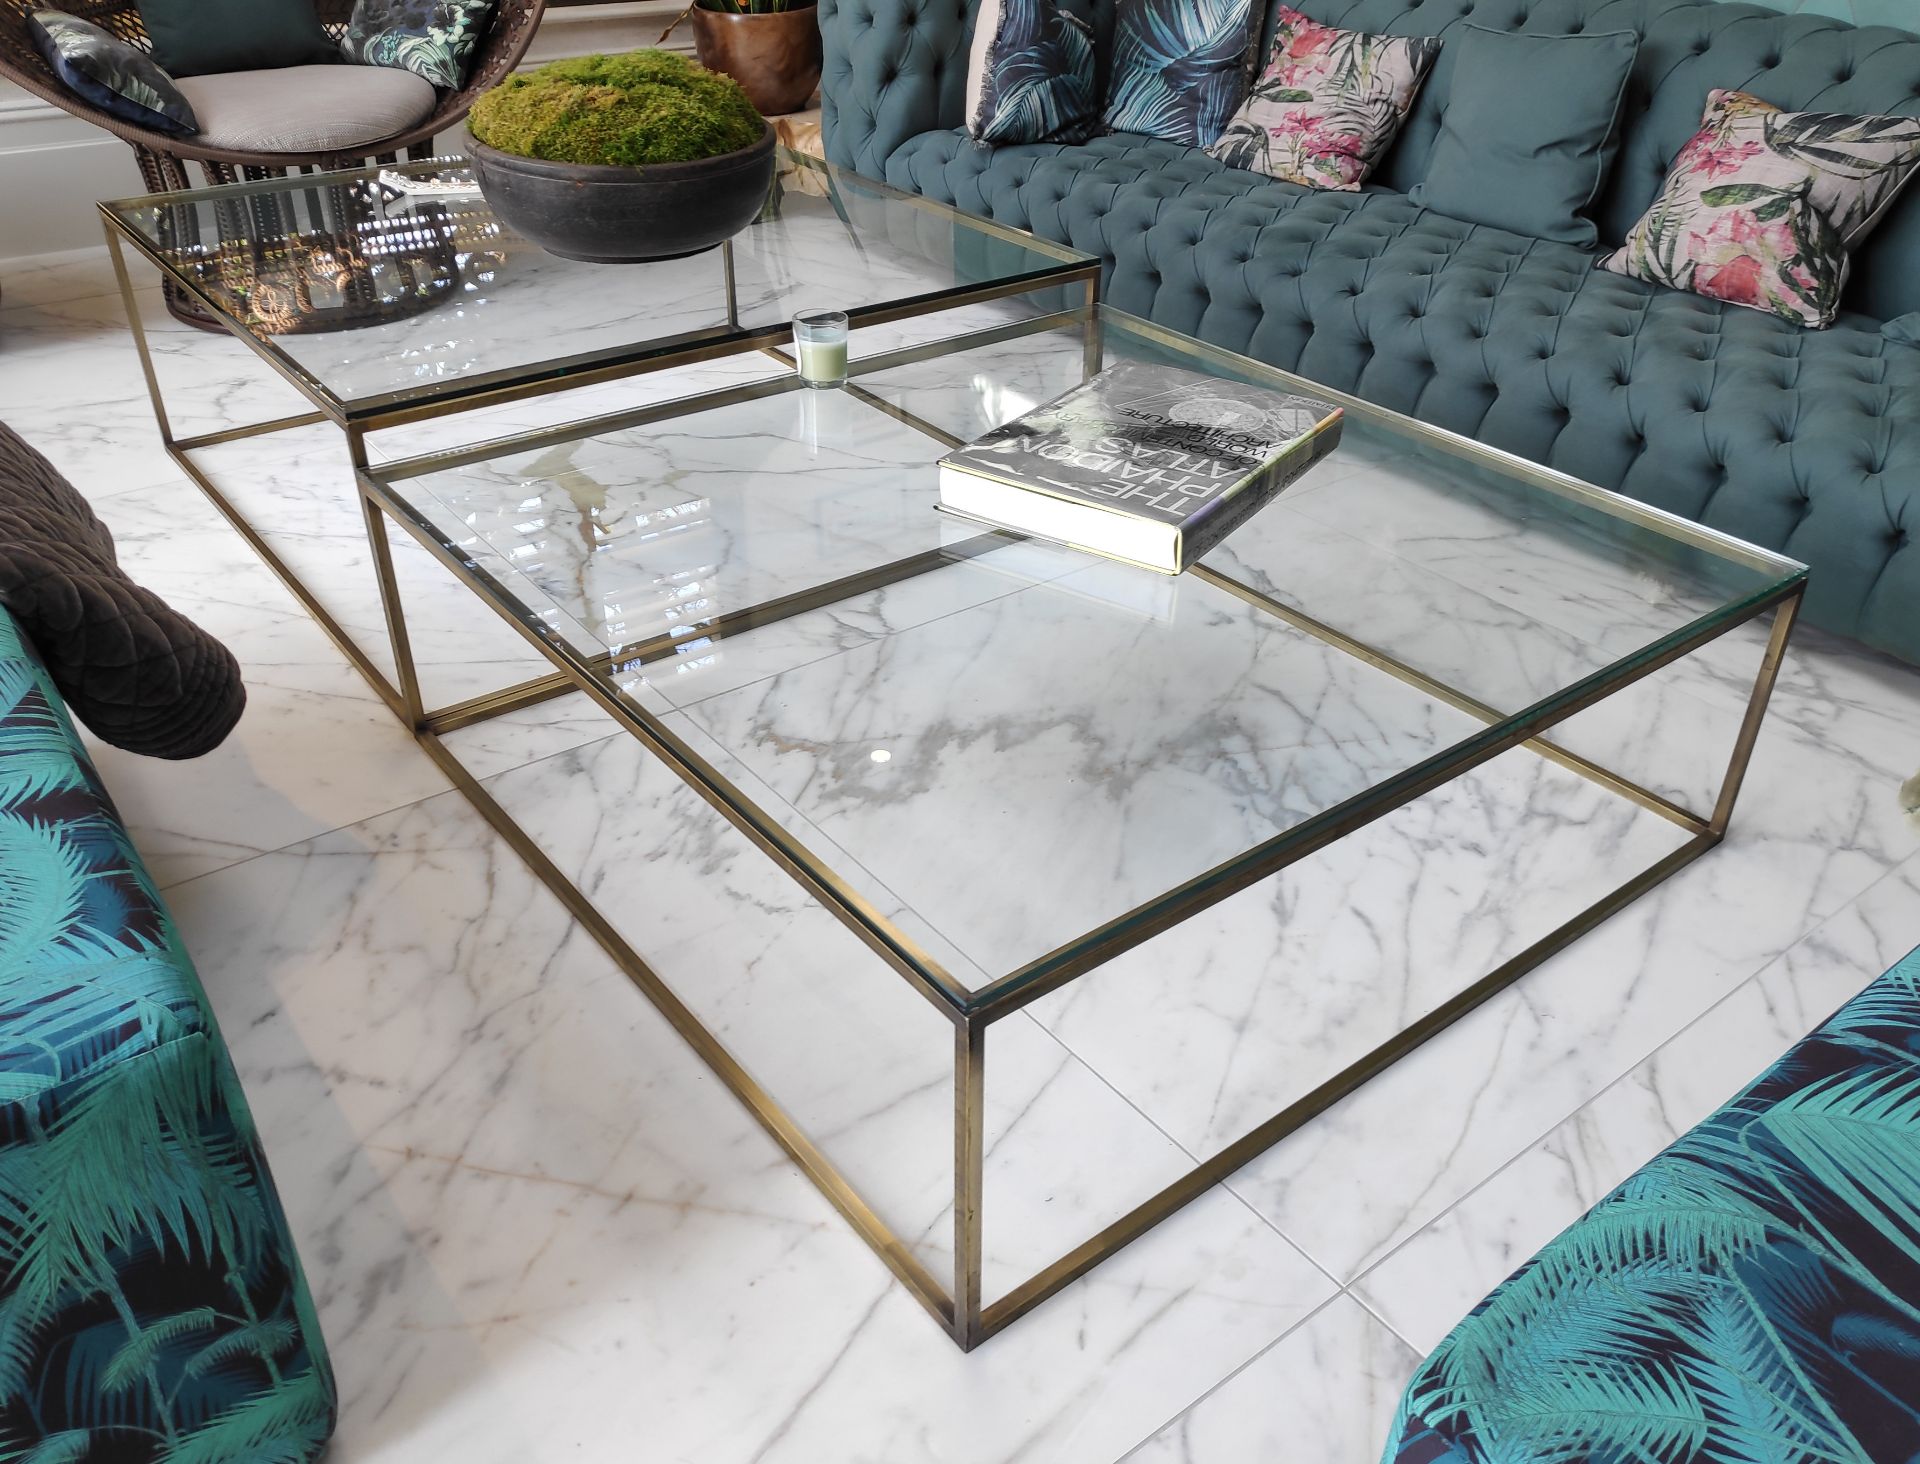 1 x Large 2-Tier Glass Coffee Table with Metal Frame - Dimensions: W240 x D120 x H45.5 cm - - Image 10 of 14